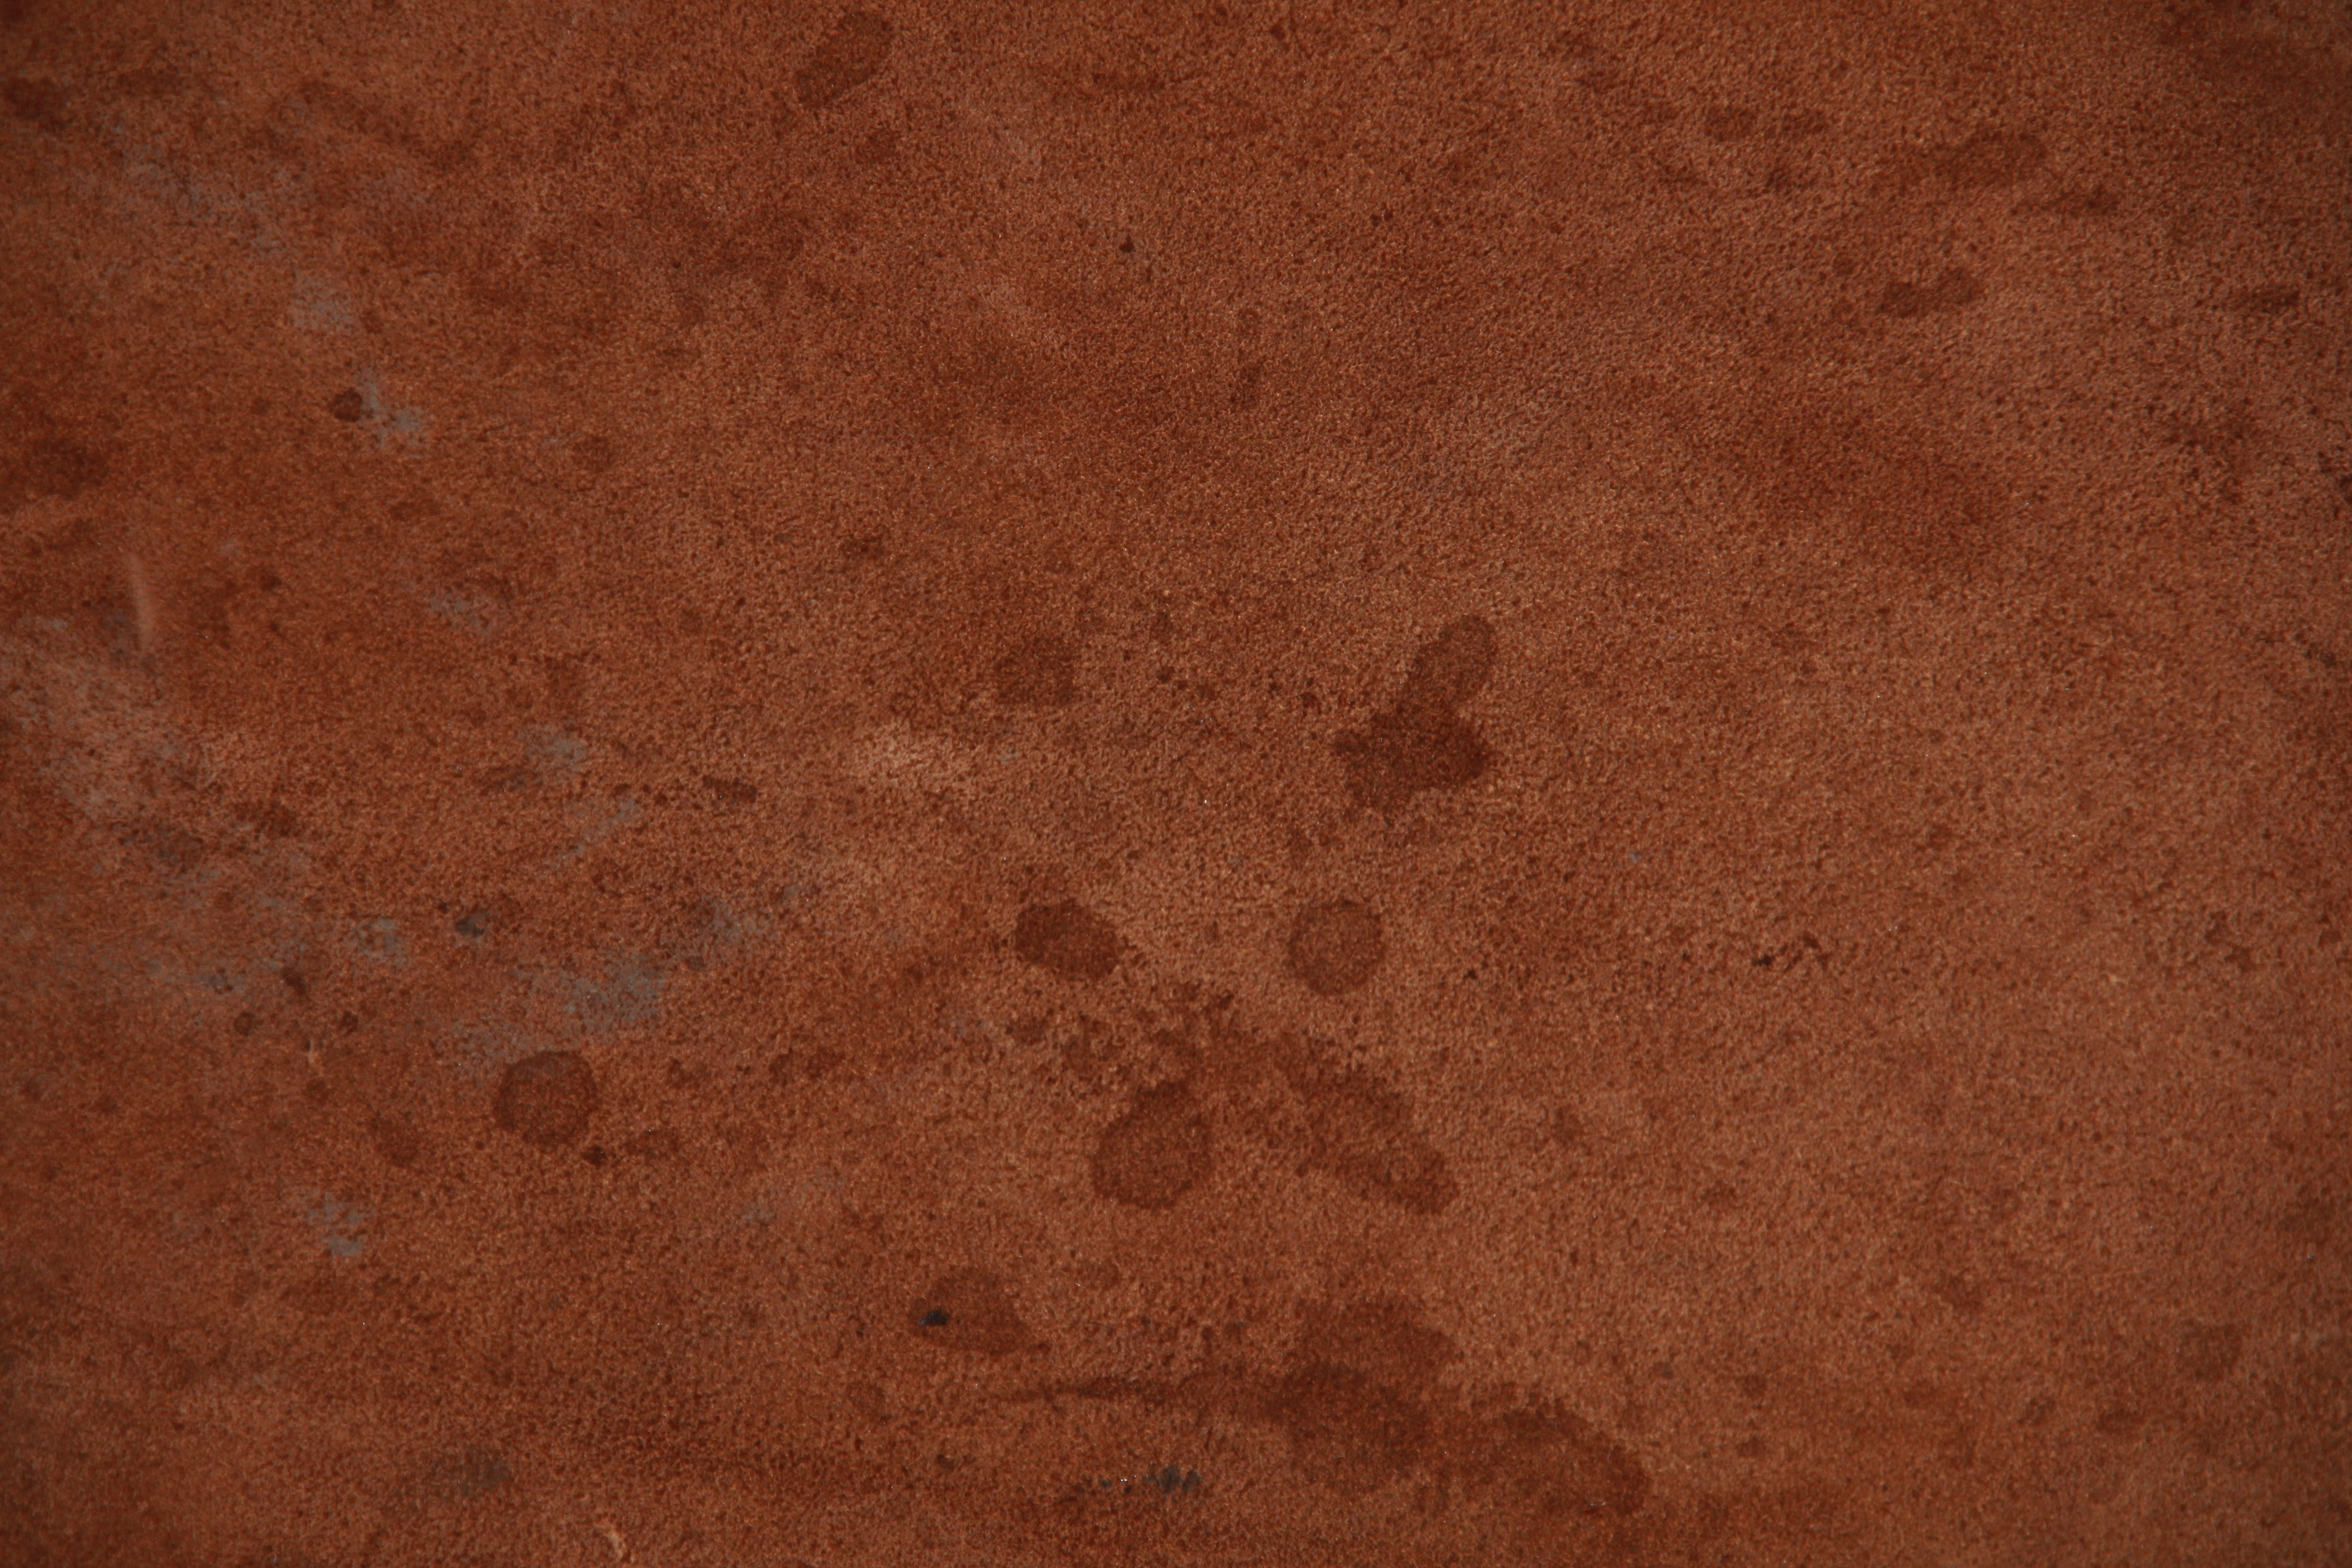  Texture coffee stained leather spill desktop wallpaper brown table